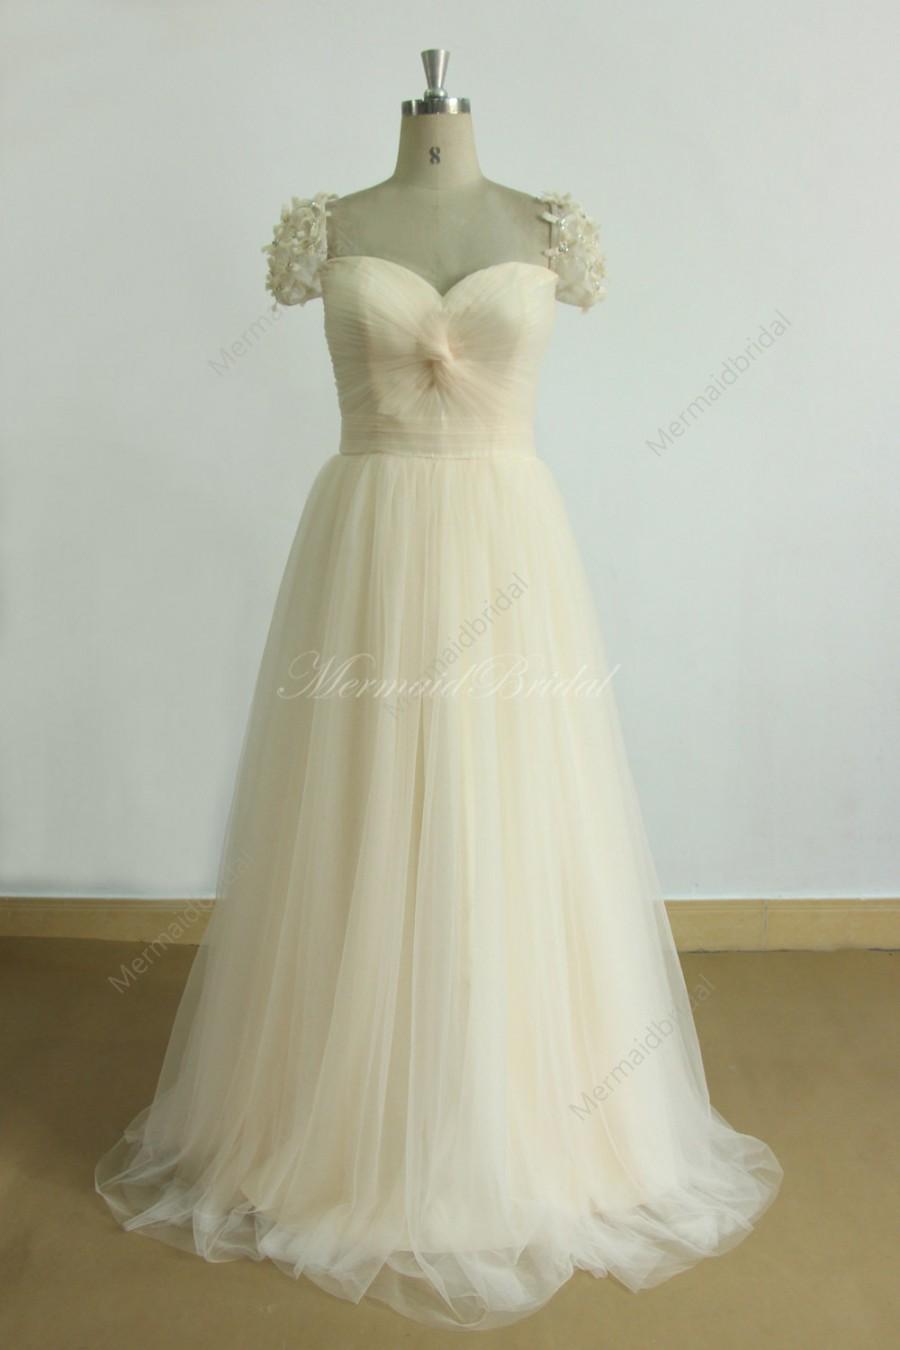 Wedding - Cream/light champagne a line tulle wedding dress with cap sleeves